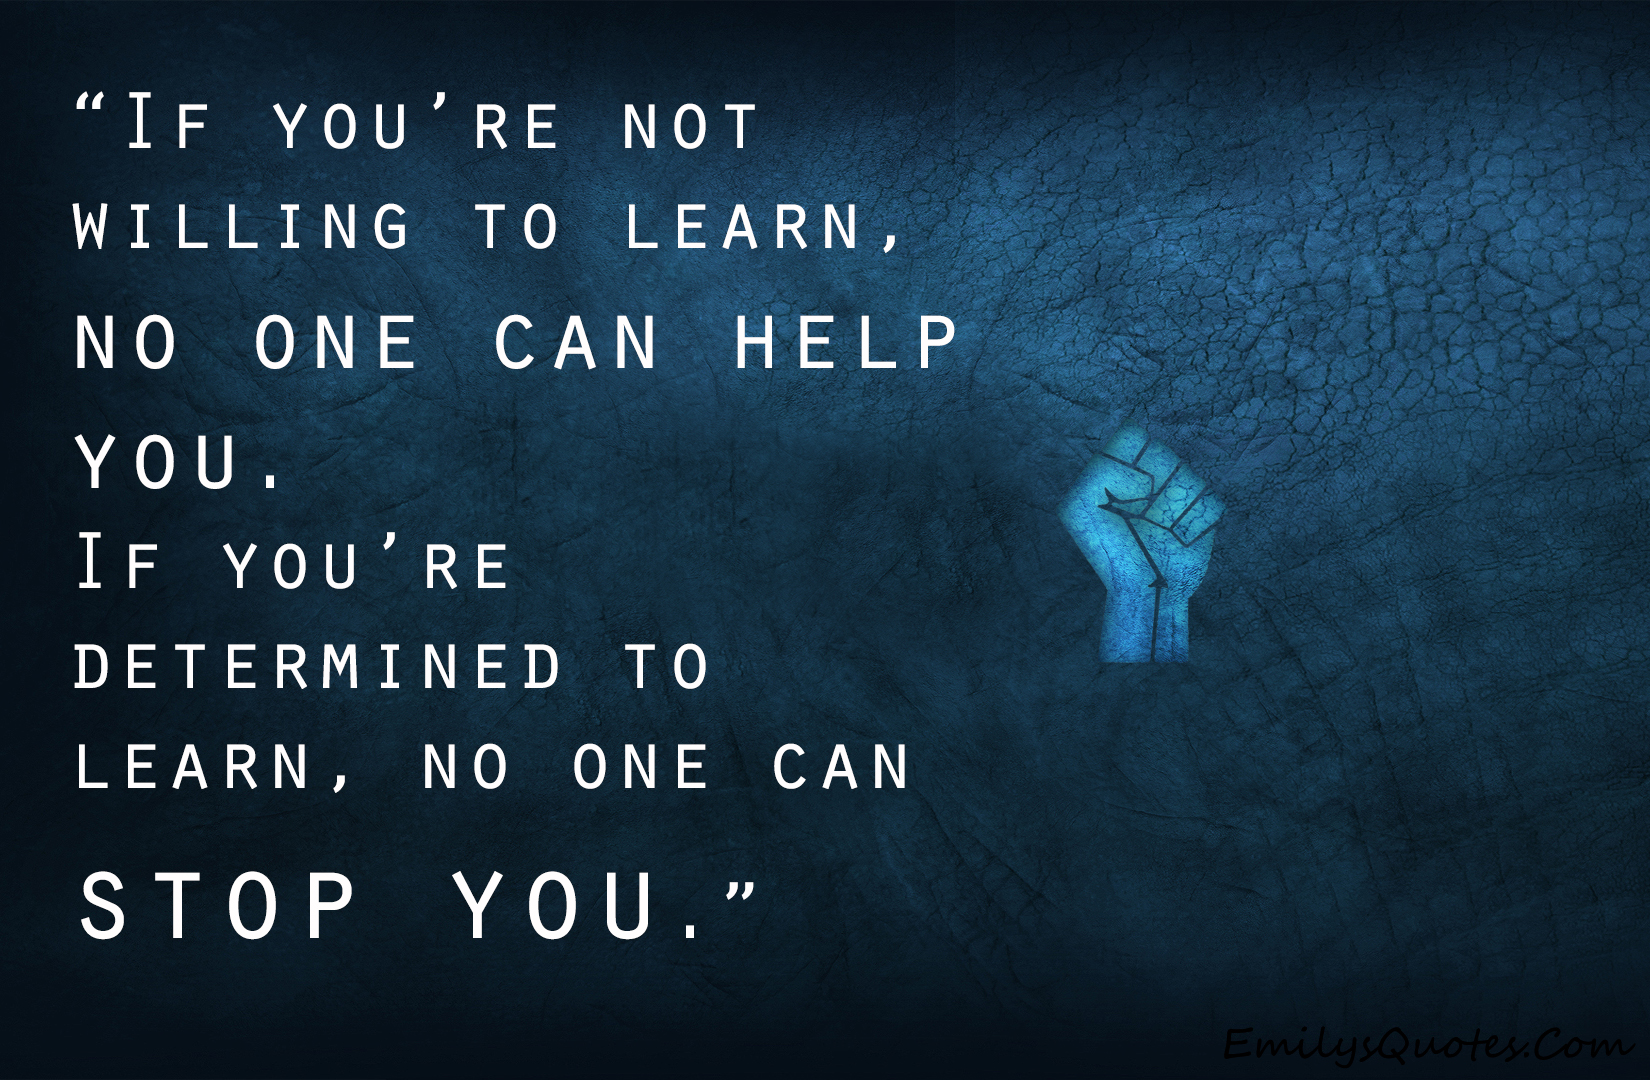 If you're not willing to learn, no one can help you inspirational education quotes